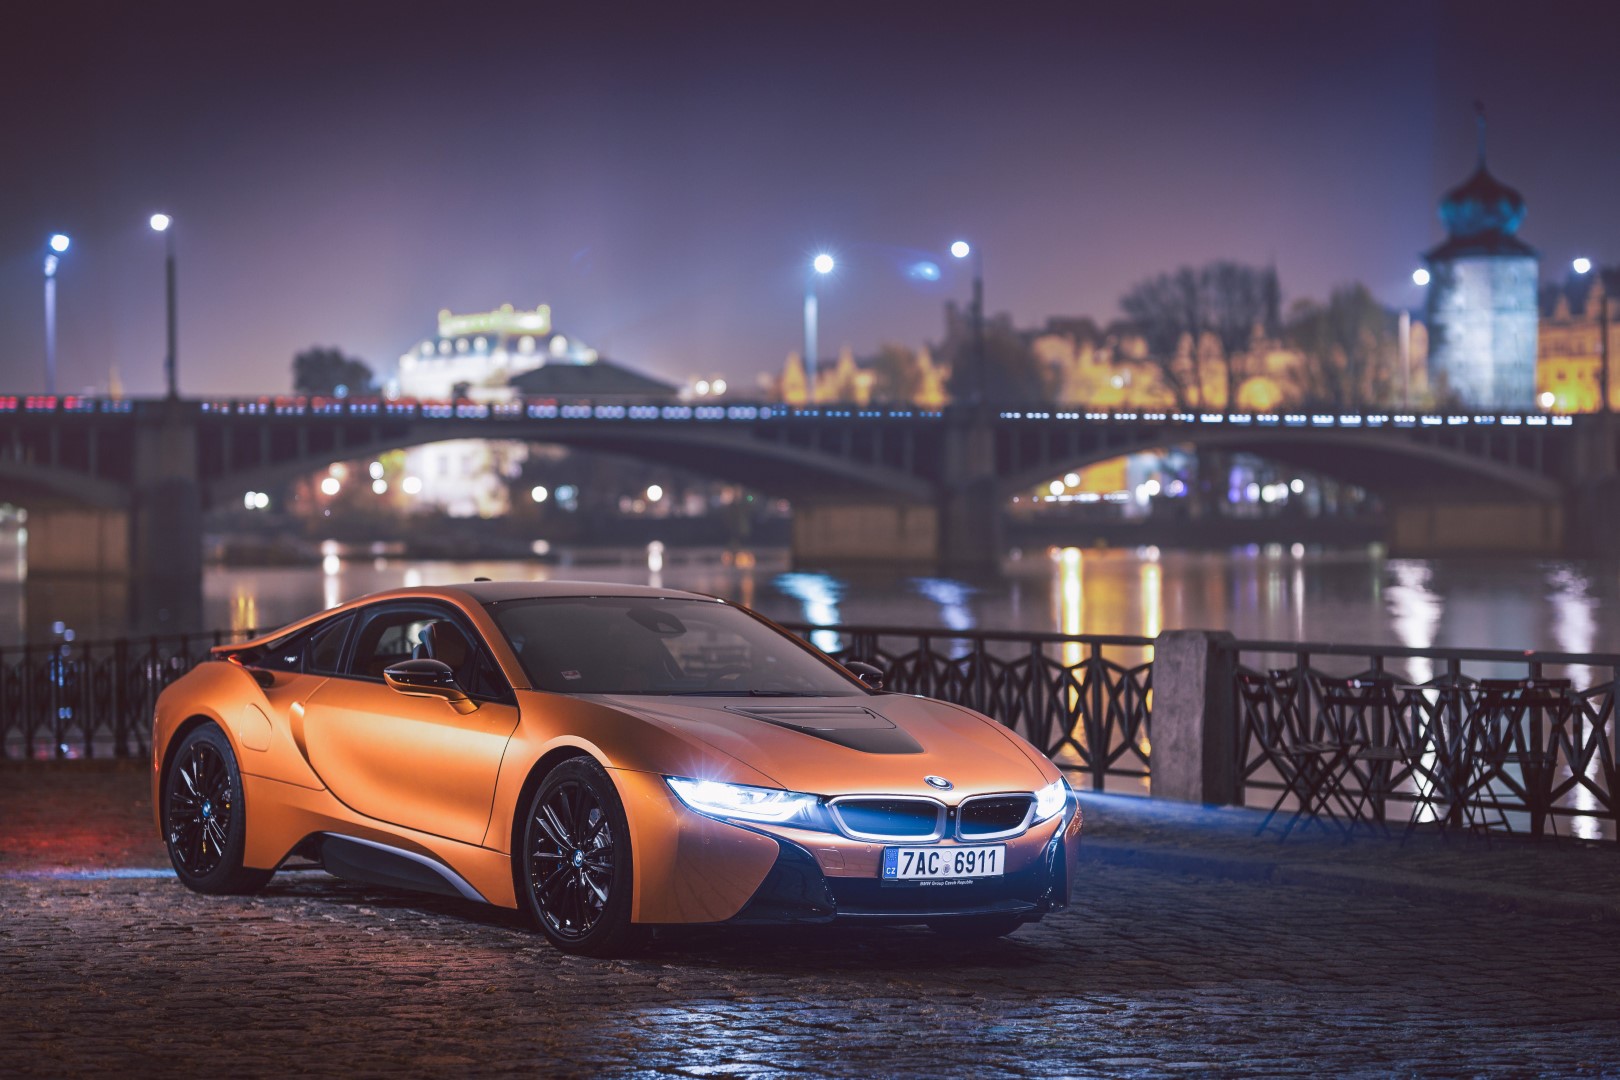 THE LAST DAY OF MERCEDES | BMW I8 ROADSTER